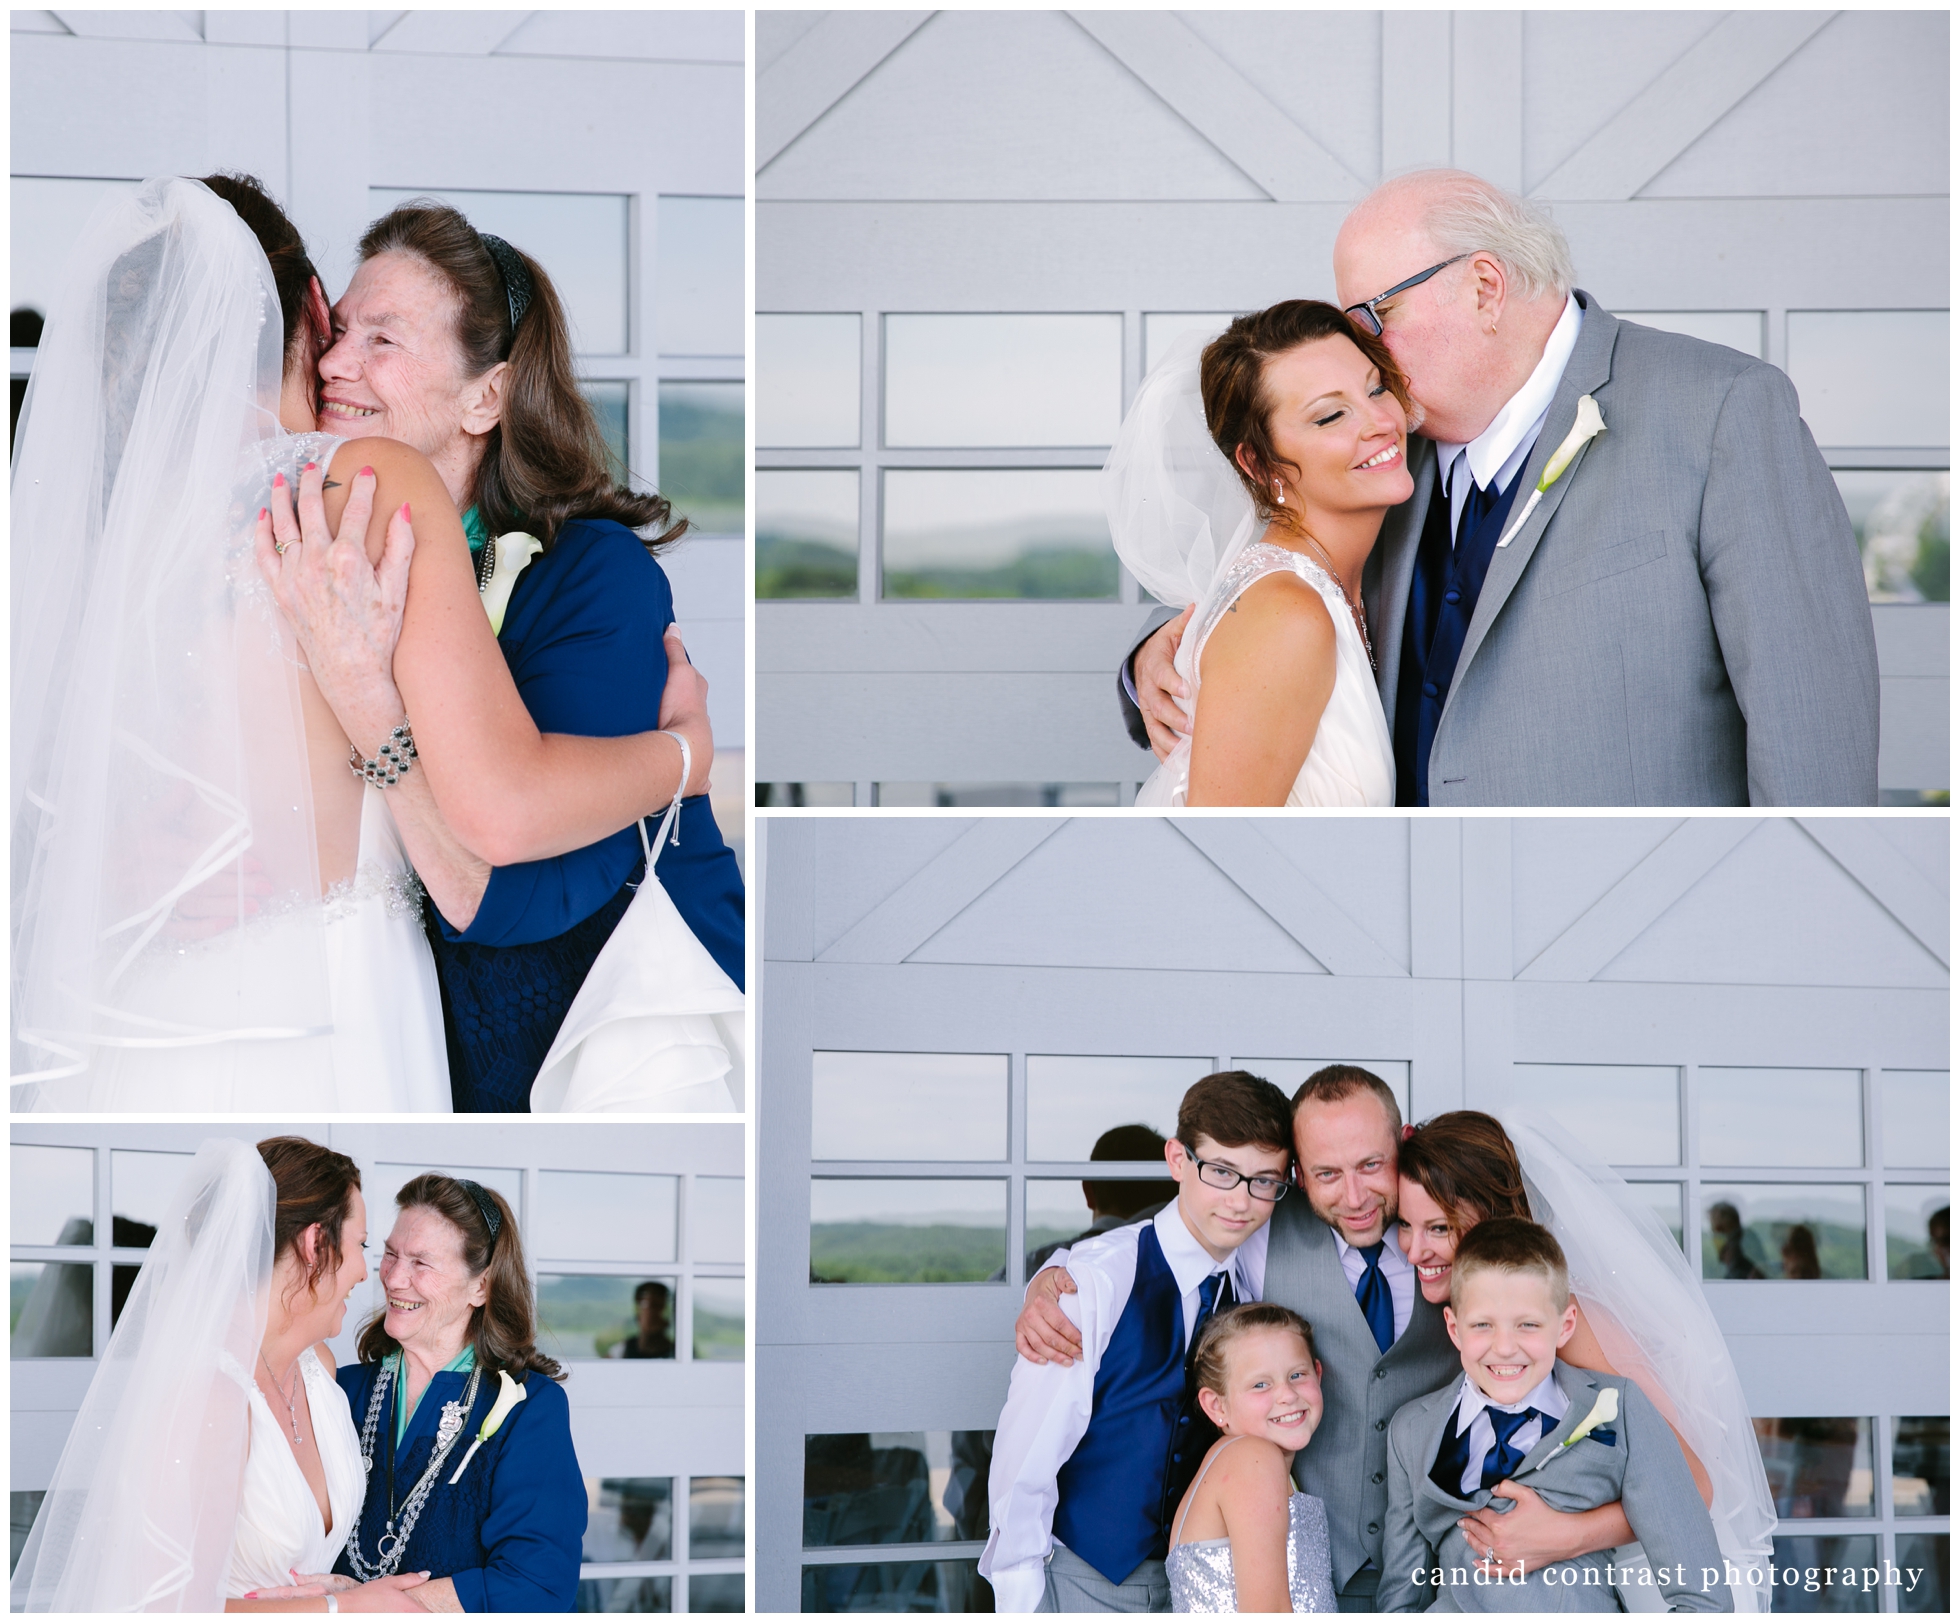 a bellevue iowa outdoor wedding at the shore event center, iowa wedding photographer candid contrast photography